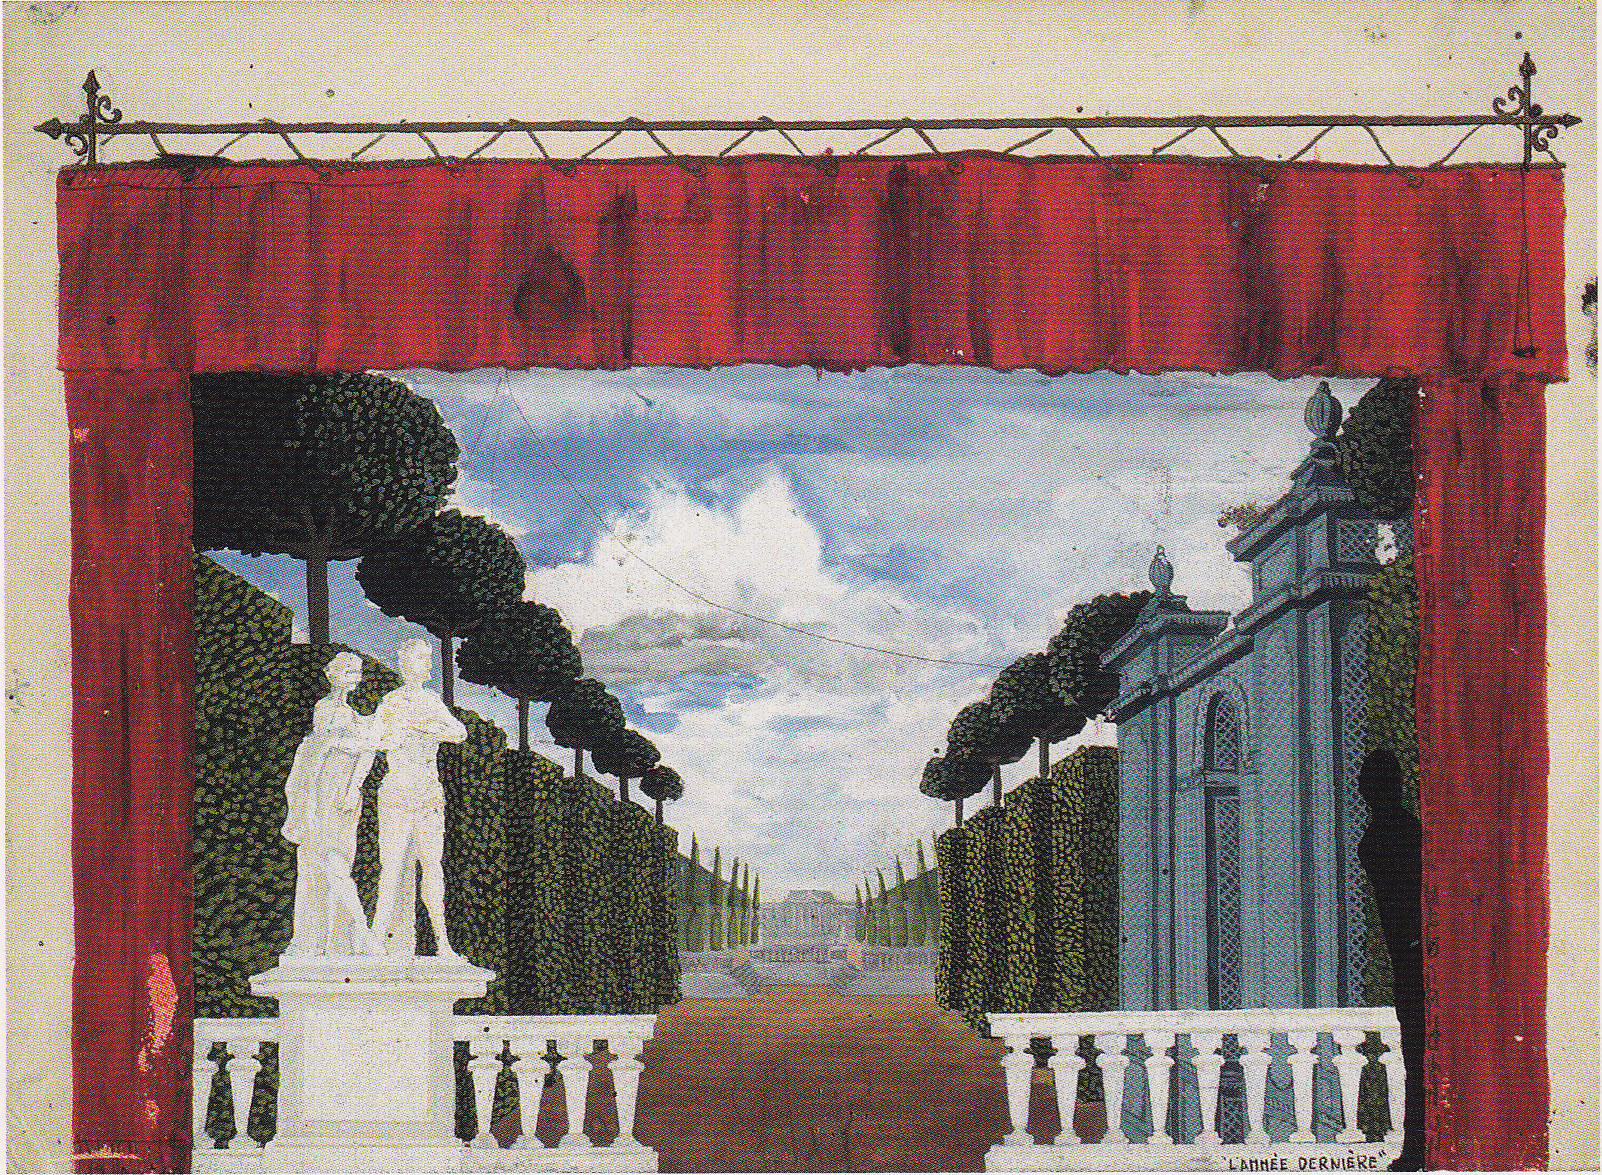 Jacques Saulnier, Design for the decor for Last Year at Marienbad, gouache on cardboard, 1960.